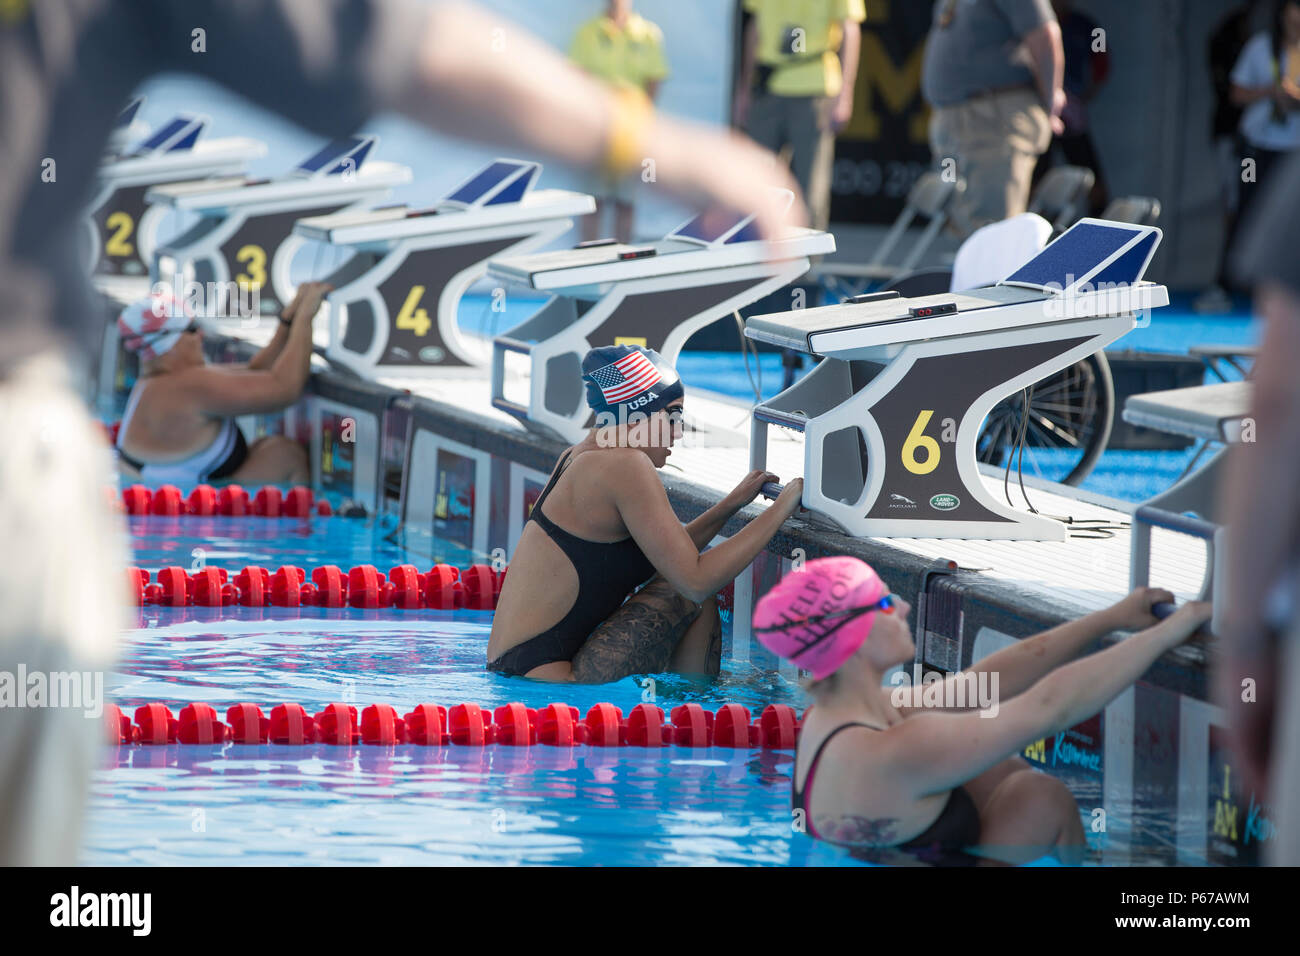 Christine Gauthier, Canada, left, Elizabeth Marks, United States, center, Anna Pollock, United Kingdom, right, prepare to compete in the 50 Meter Backstroke event during the 2016 Invictus Games, ESPN Wide World of Sports Complex, Orlando, Fla., May 11, 2016. The Invictus Games are an adaptive sports competition which was created by Prince Harry of the United Kingdom after he was inspired by the DoD Warrior Games. This event brings together wounded, ill, and injured service members and veterans from 15 nations for events including: archery, cycling, indoor rowing, powerlifting, sitting volleyba Stock Photo